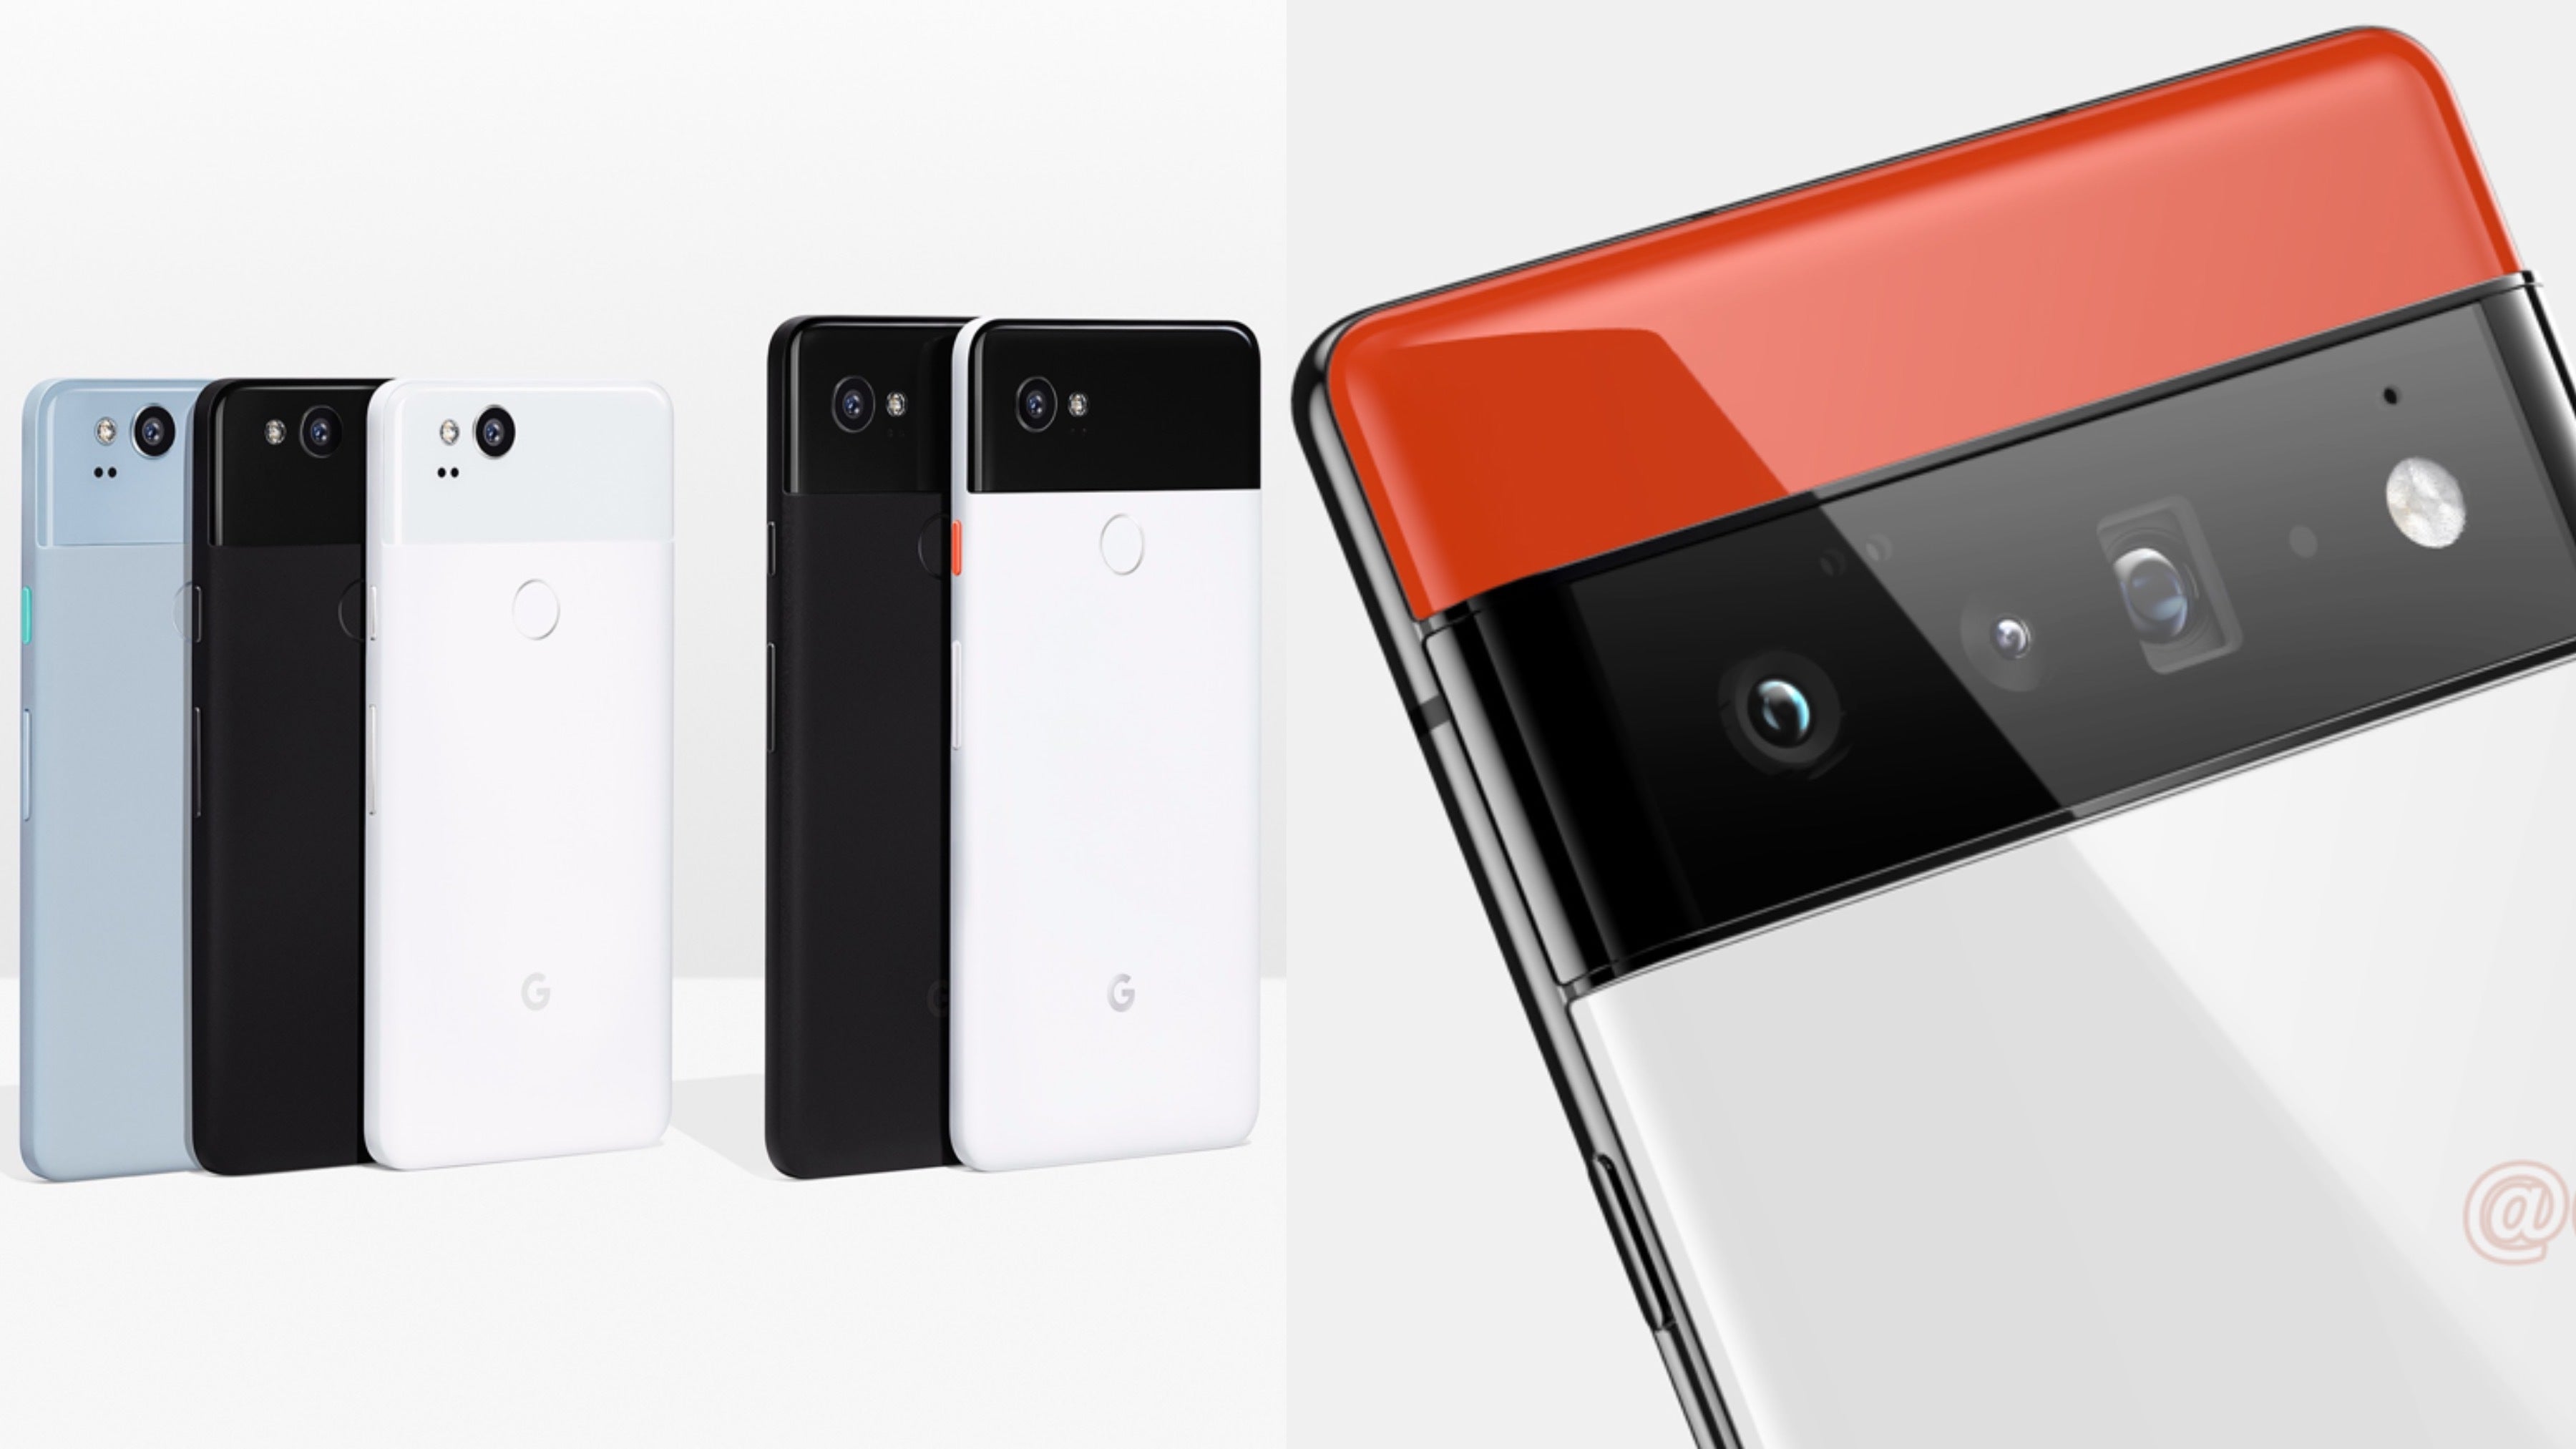 Google hasn't upgraded the main camera sensor on its flagship Pixel phone for 3-4 years in a row. - Google Pixel 6 Pro and its 122MP camera system: The 4-year wait for 4 new cameras